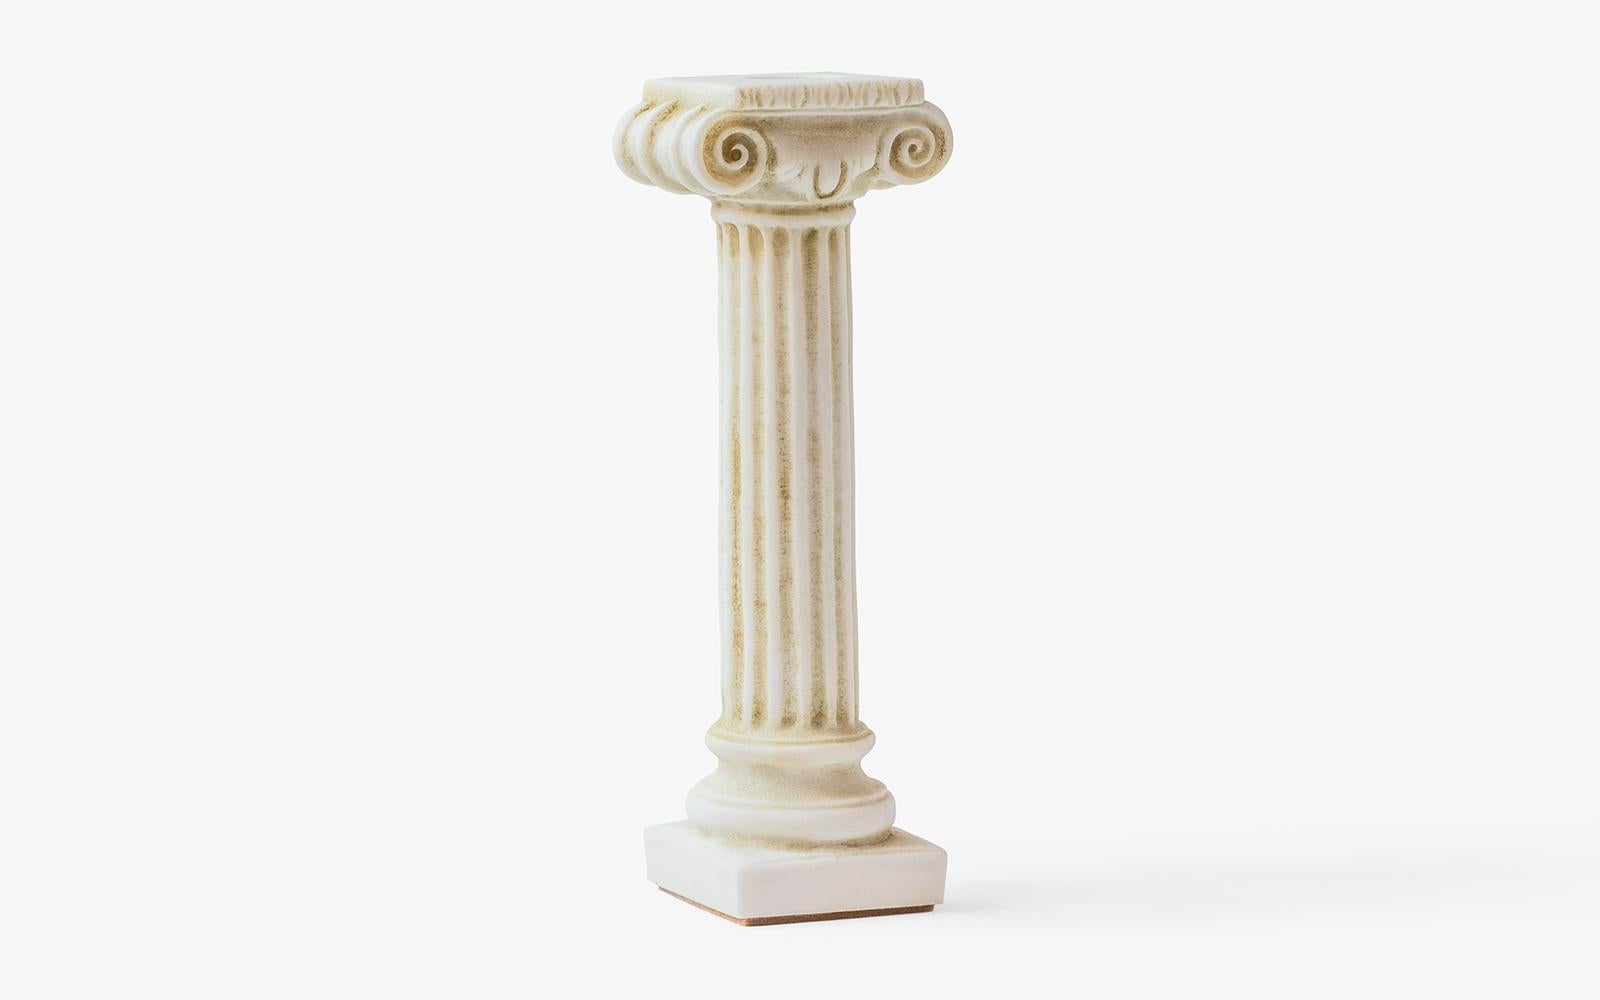 Weight: 700 gr

Ionic regular columns, born on the western and southern coasts of Anatolia, have a thin, long and elegant form.

This Ionic column candlestick is a unique and elegant decorative item that is made from compressed marble powder. It